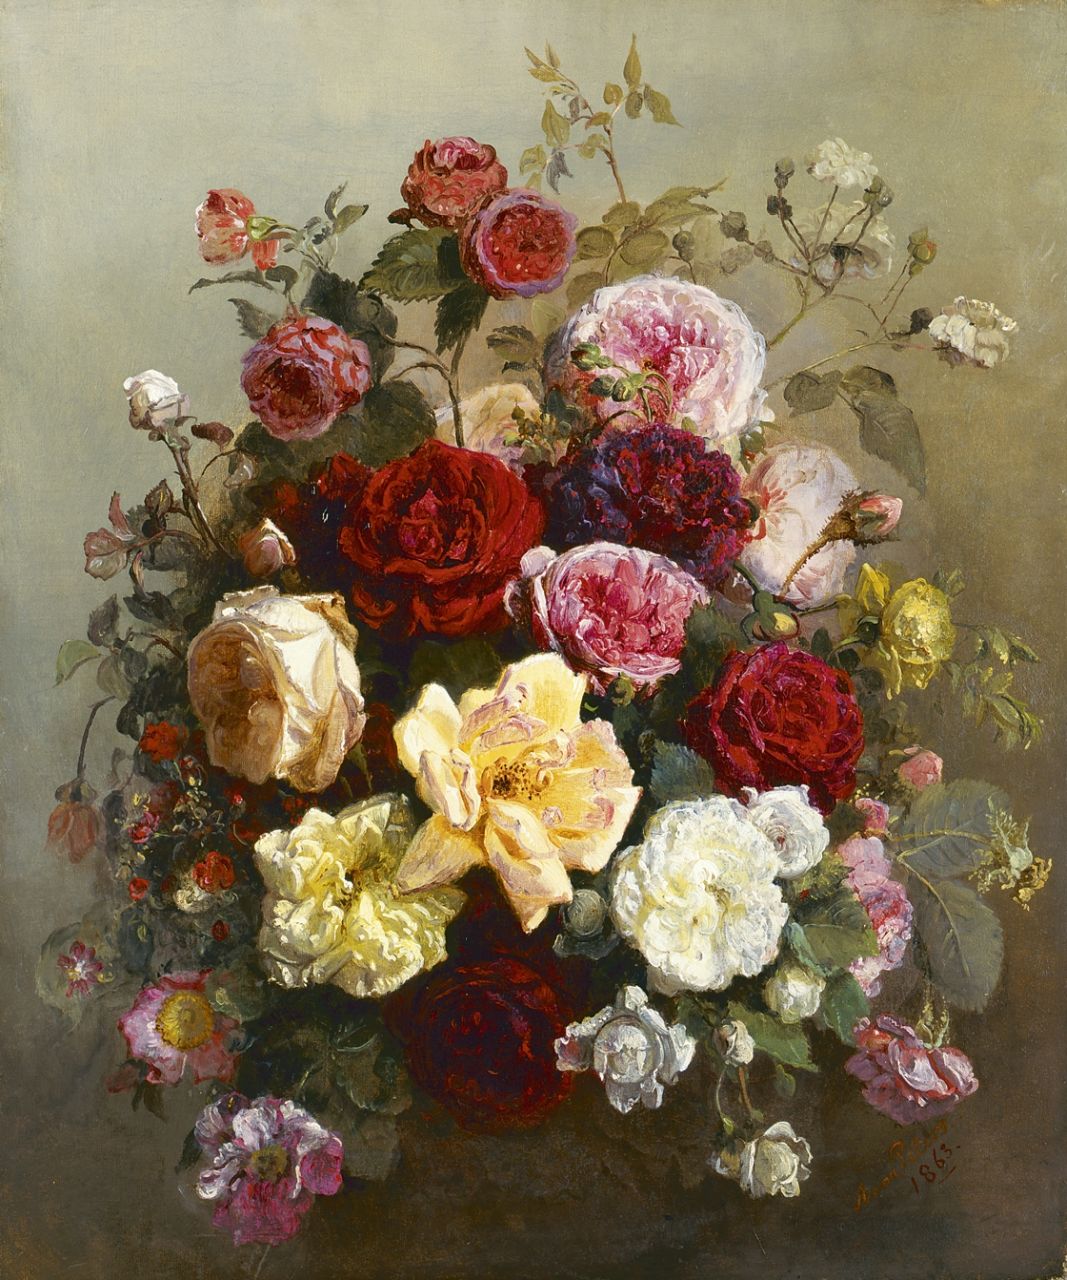 Peters A.  | Anna Peters, A still life of roses, Öl auf Leinwand 58,0 x 48,3 cm, signed l.r. und dated 1863